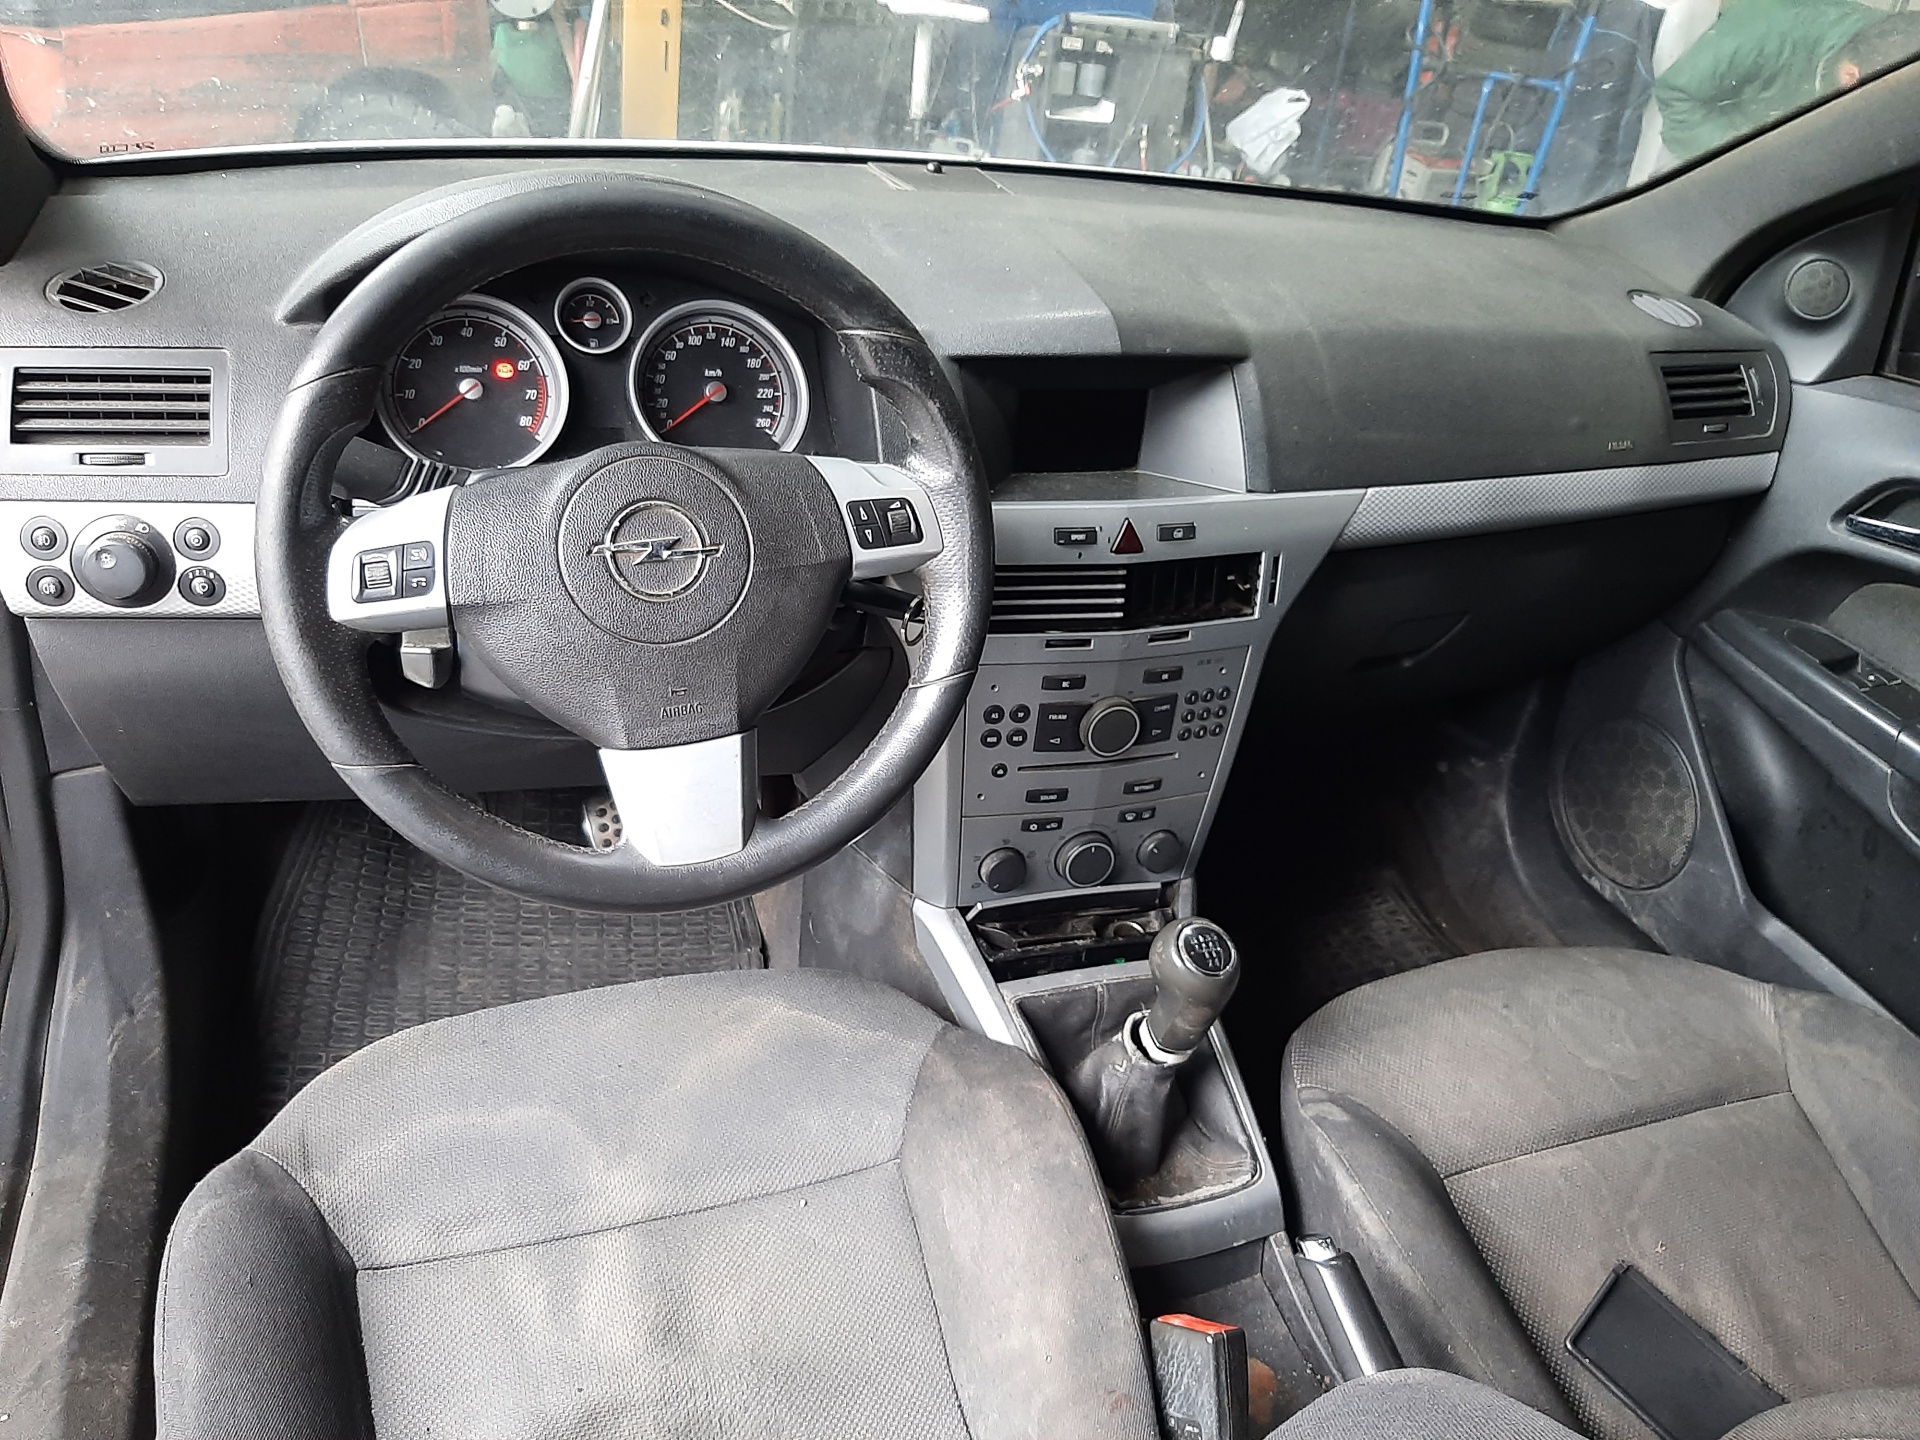 OPEL Astra H (2004-2014) Other Interior Parts 24463524 23822699